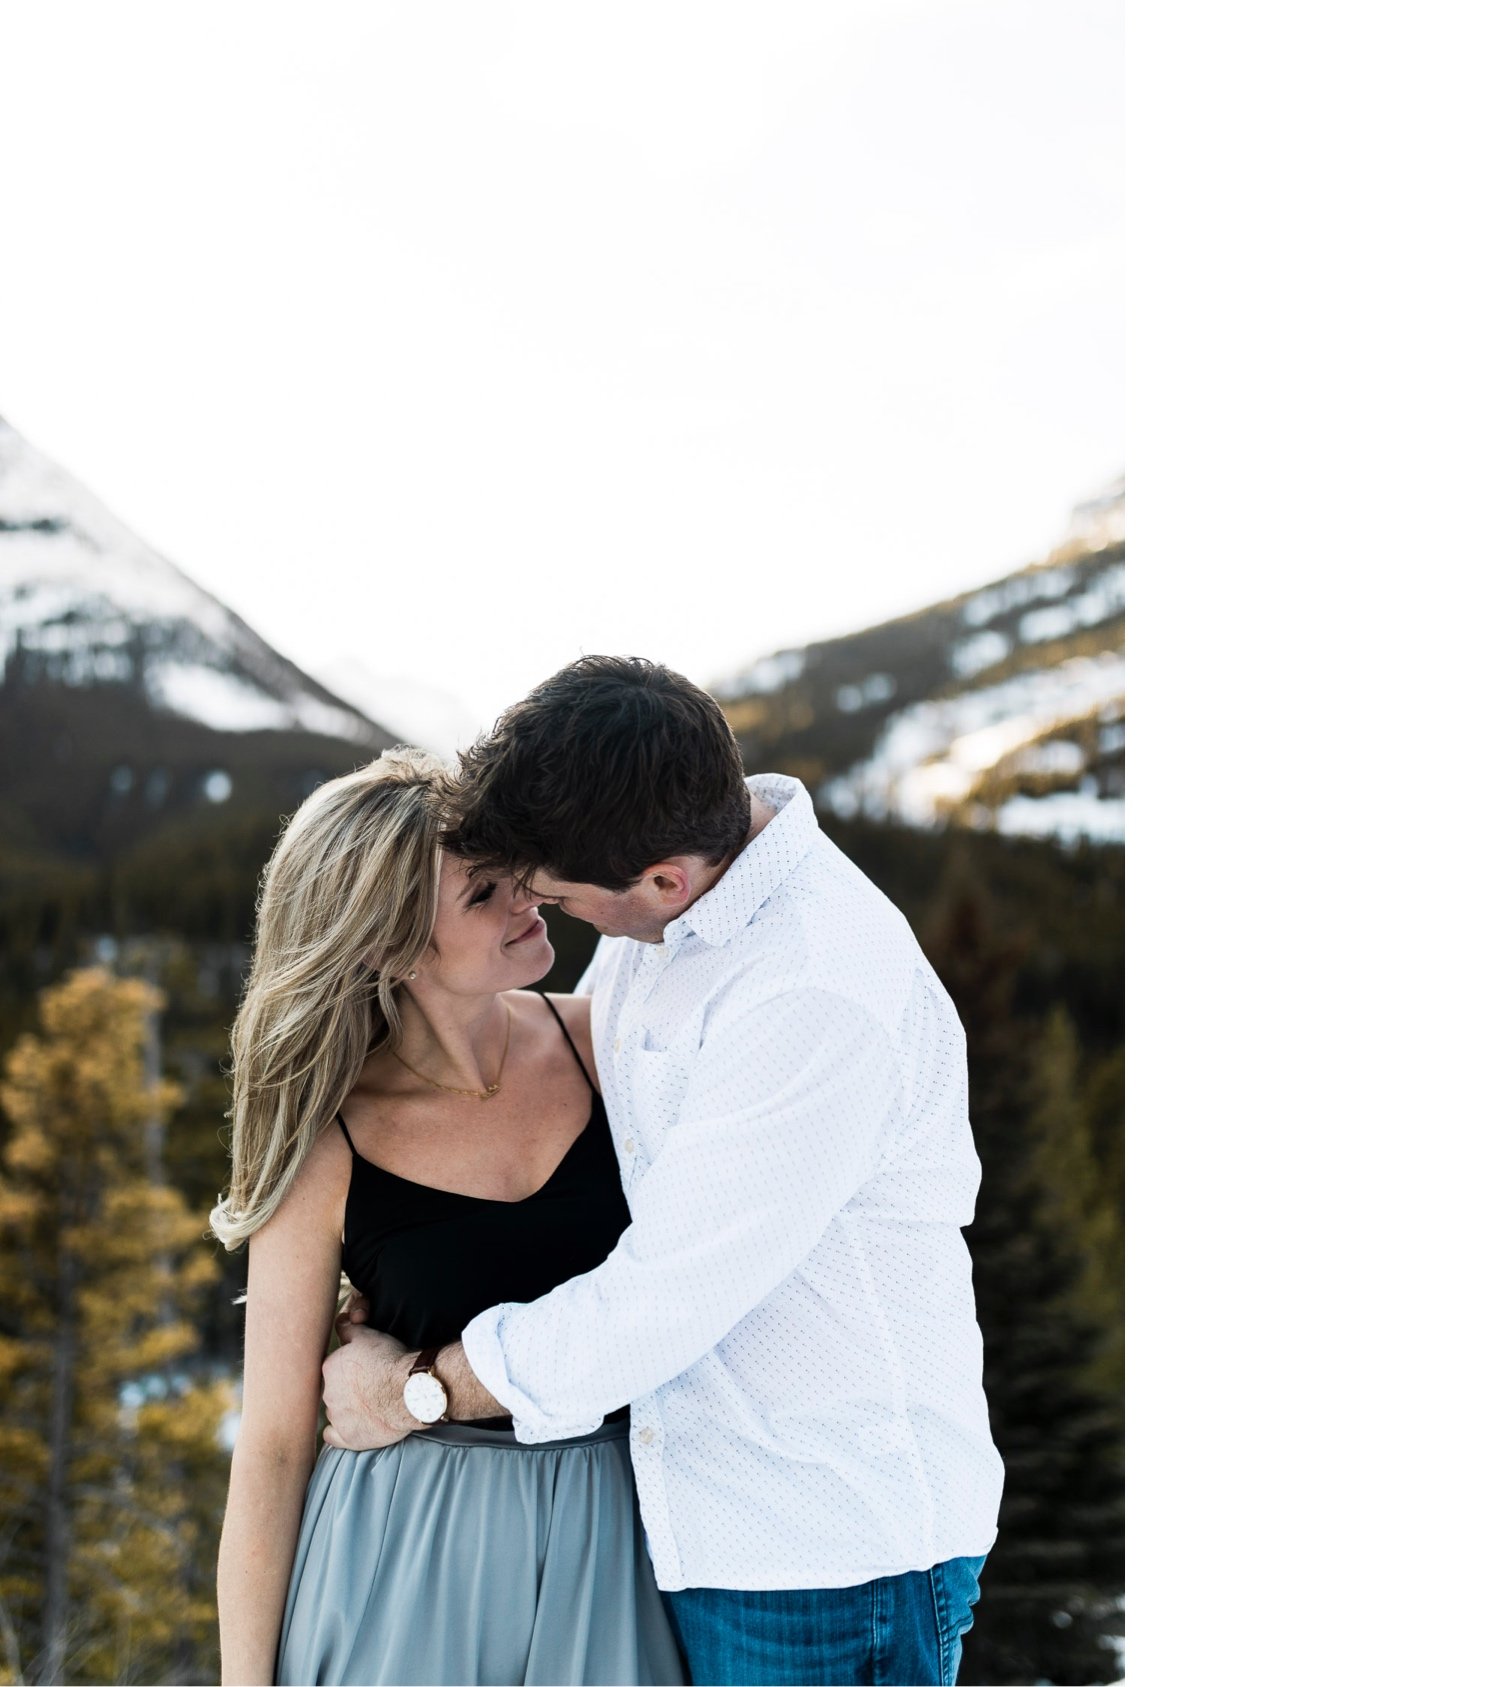 22_sunlight_landscape_Kananaskis_Canmore_Banff_trees_couple_engagement_close_simple_dog_cuddle_kiss_golden_hour_intimate_nature_mountains_fiancee_spring_winter_delicate_ice_bride_snow_soft_Calgary_Alberta_photographer_forest_groom_outdoor.jpg